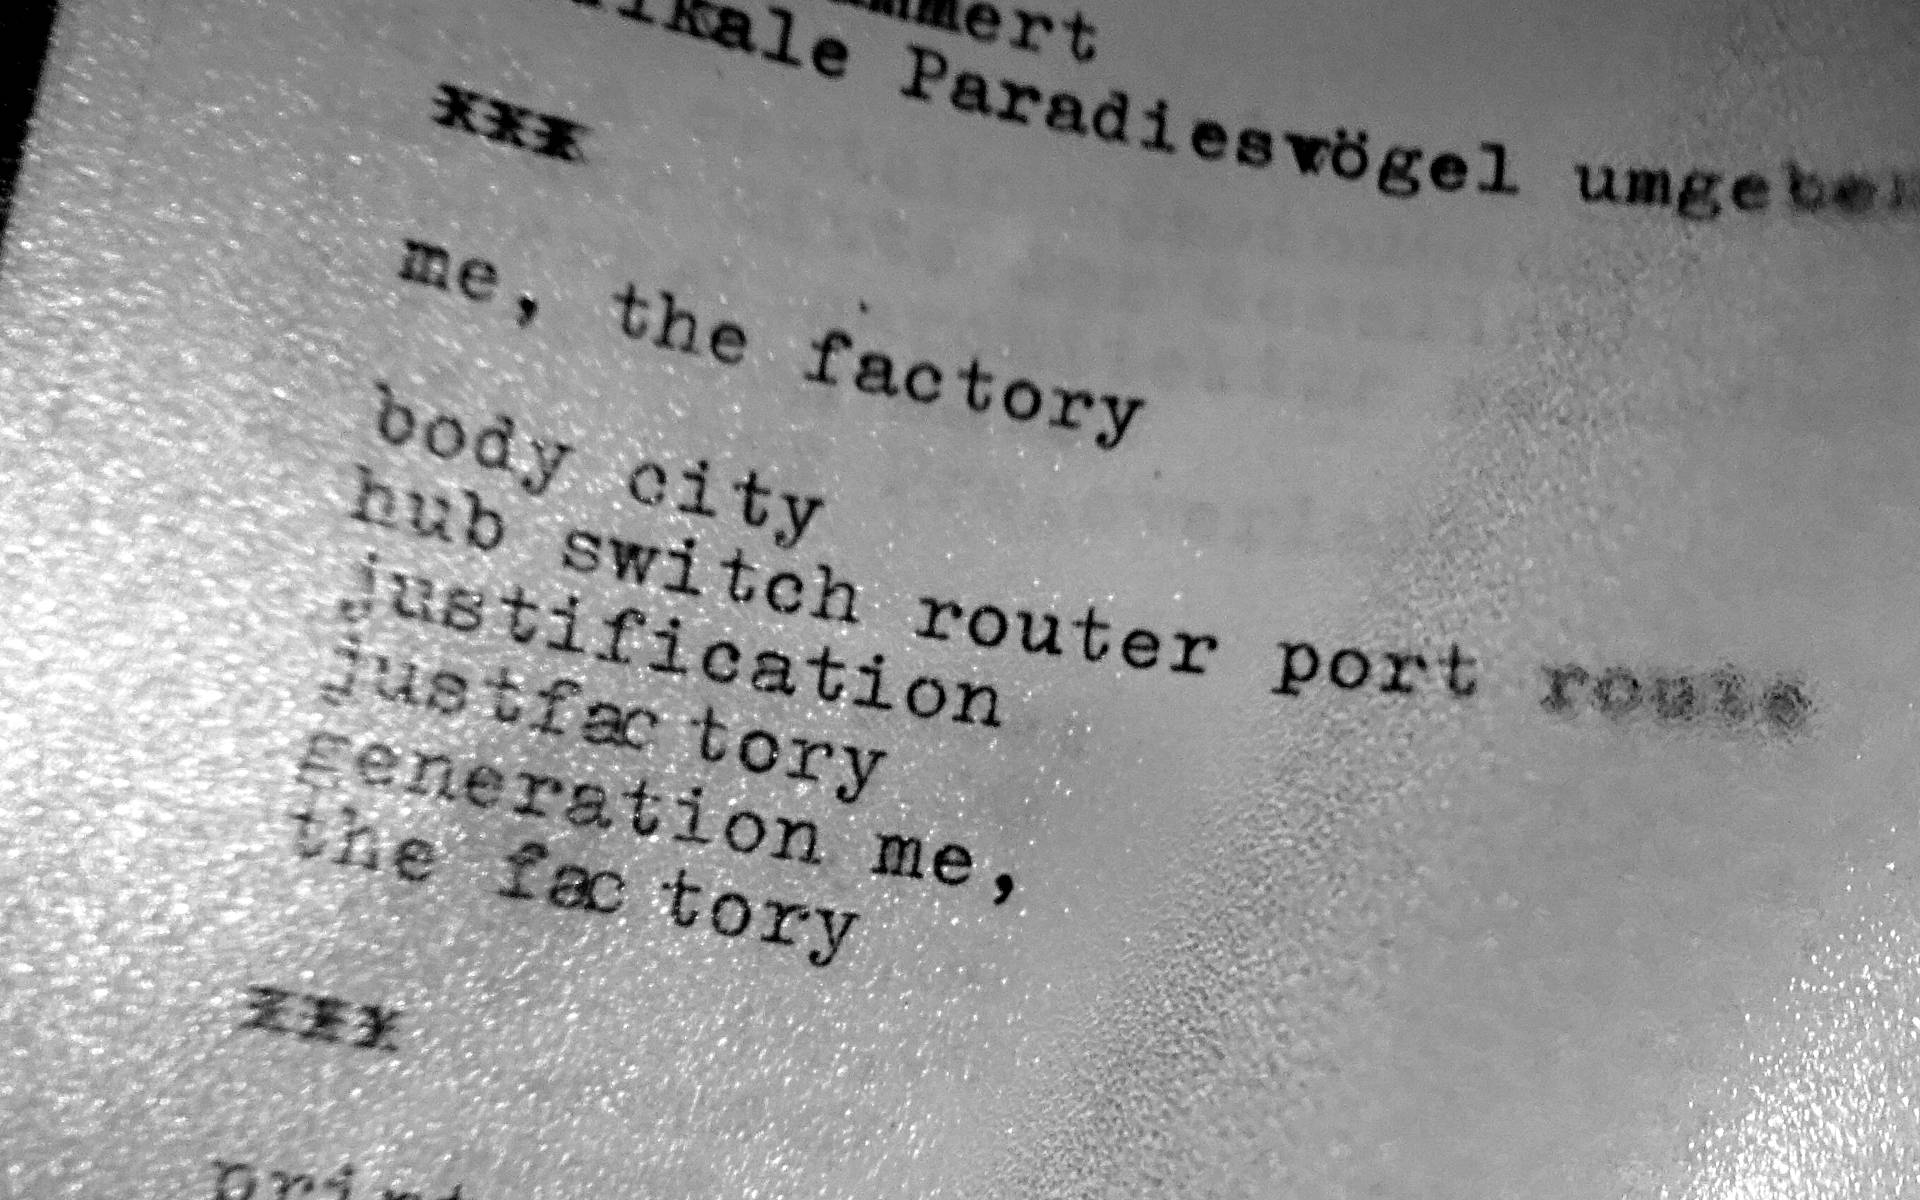 the poem is written with a typewriter